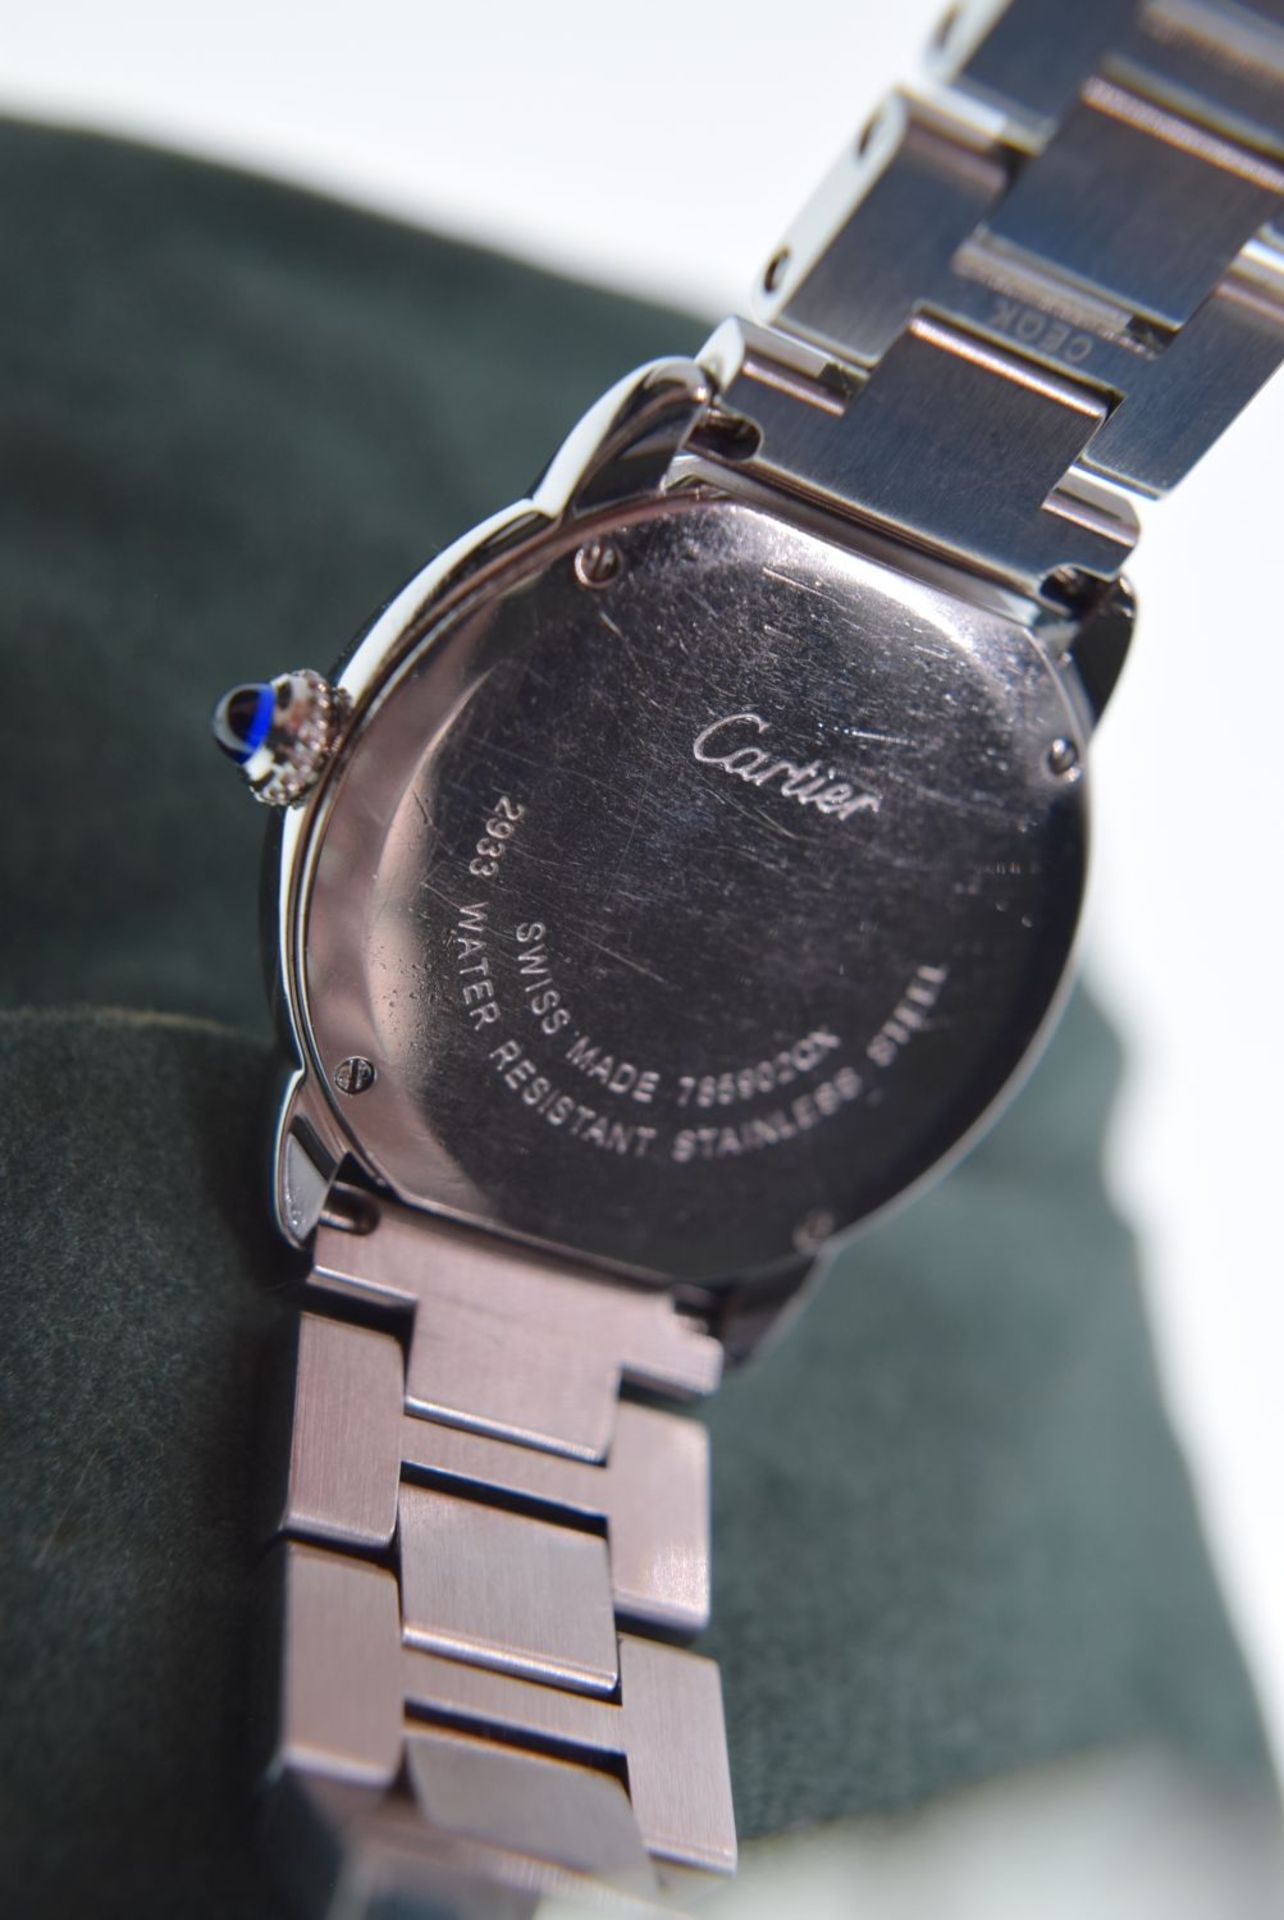 CARTIER RONDE SOLO REF. 2933 IN STAINLESS STEEL - Image 3 of 5